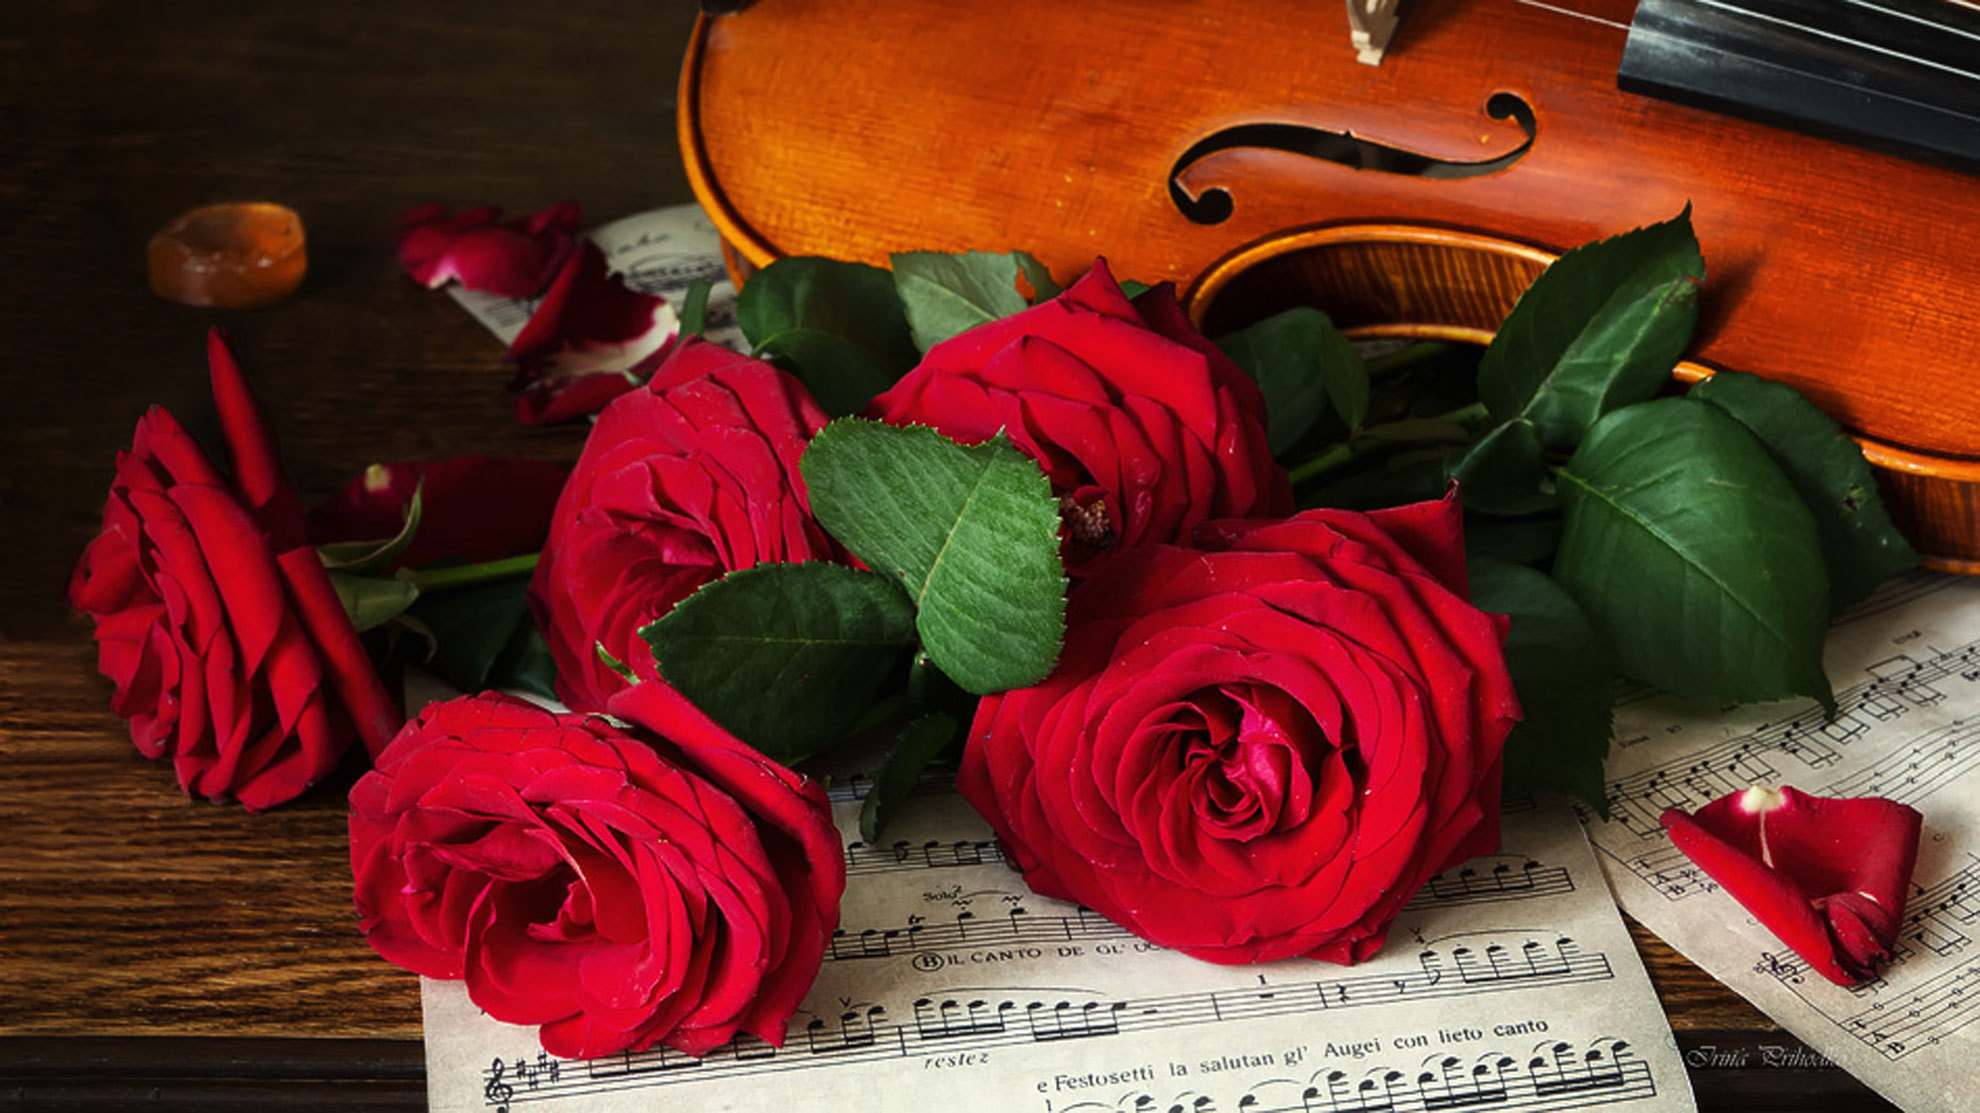 Wallpaper | Home & Living | photo | picture | violin ...